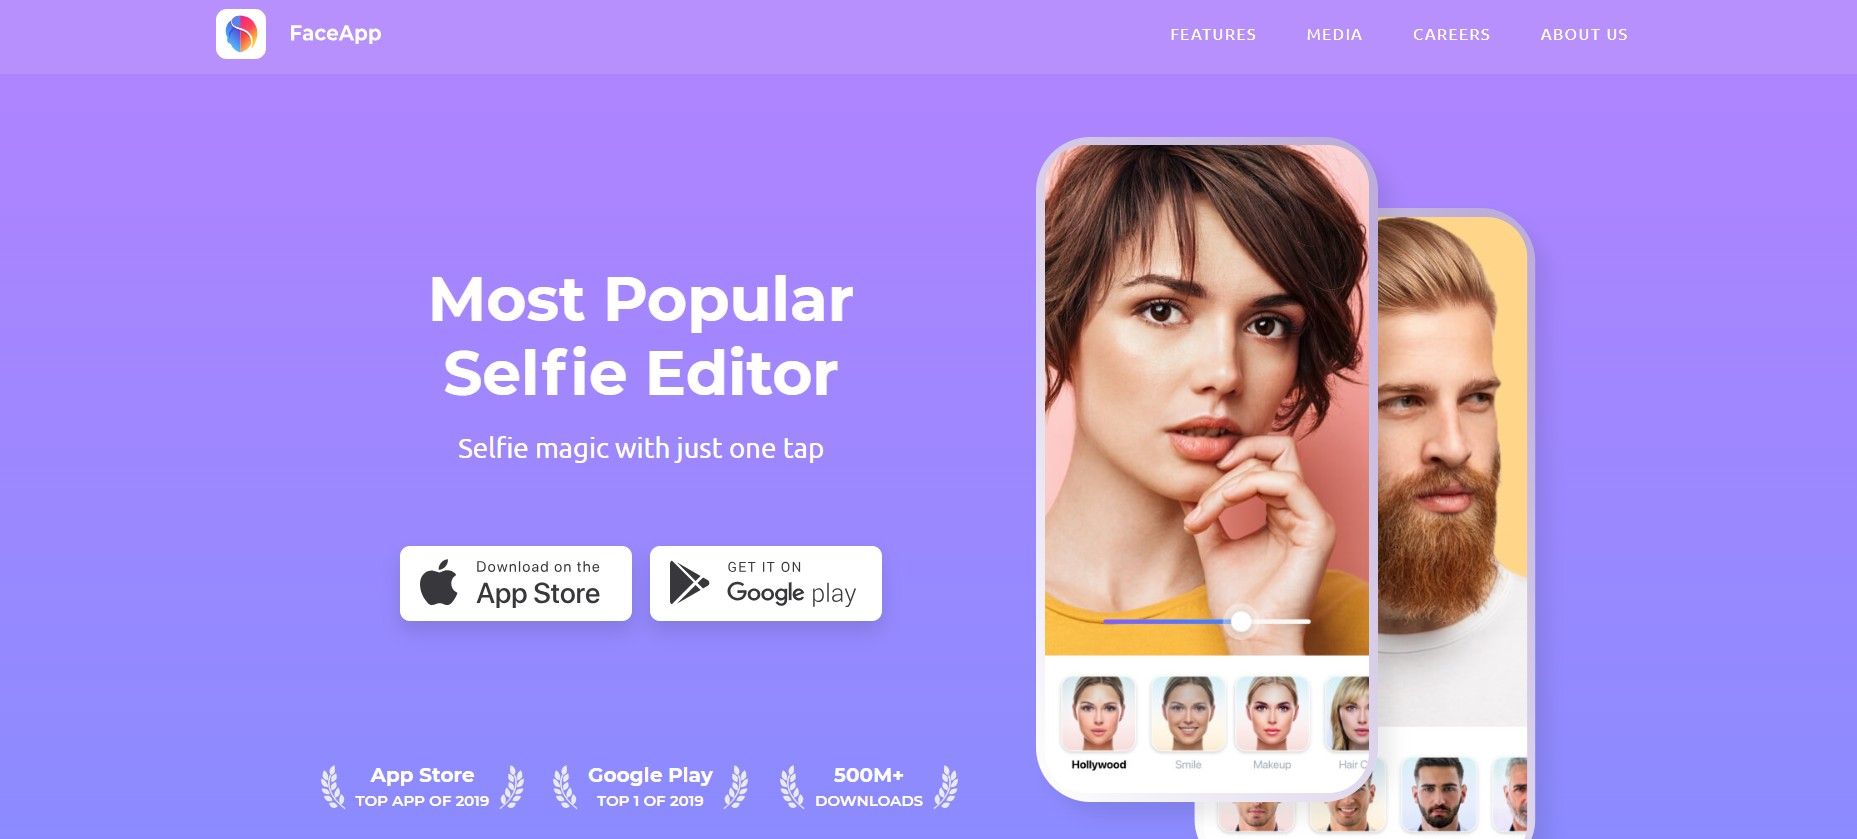 FaceApp - AI-Powered Photo Editor for Transformative Effects